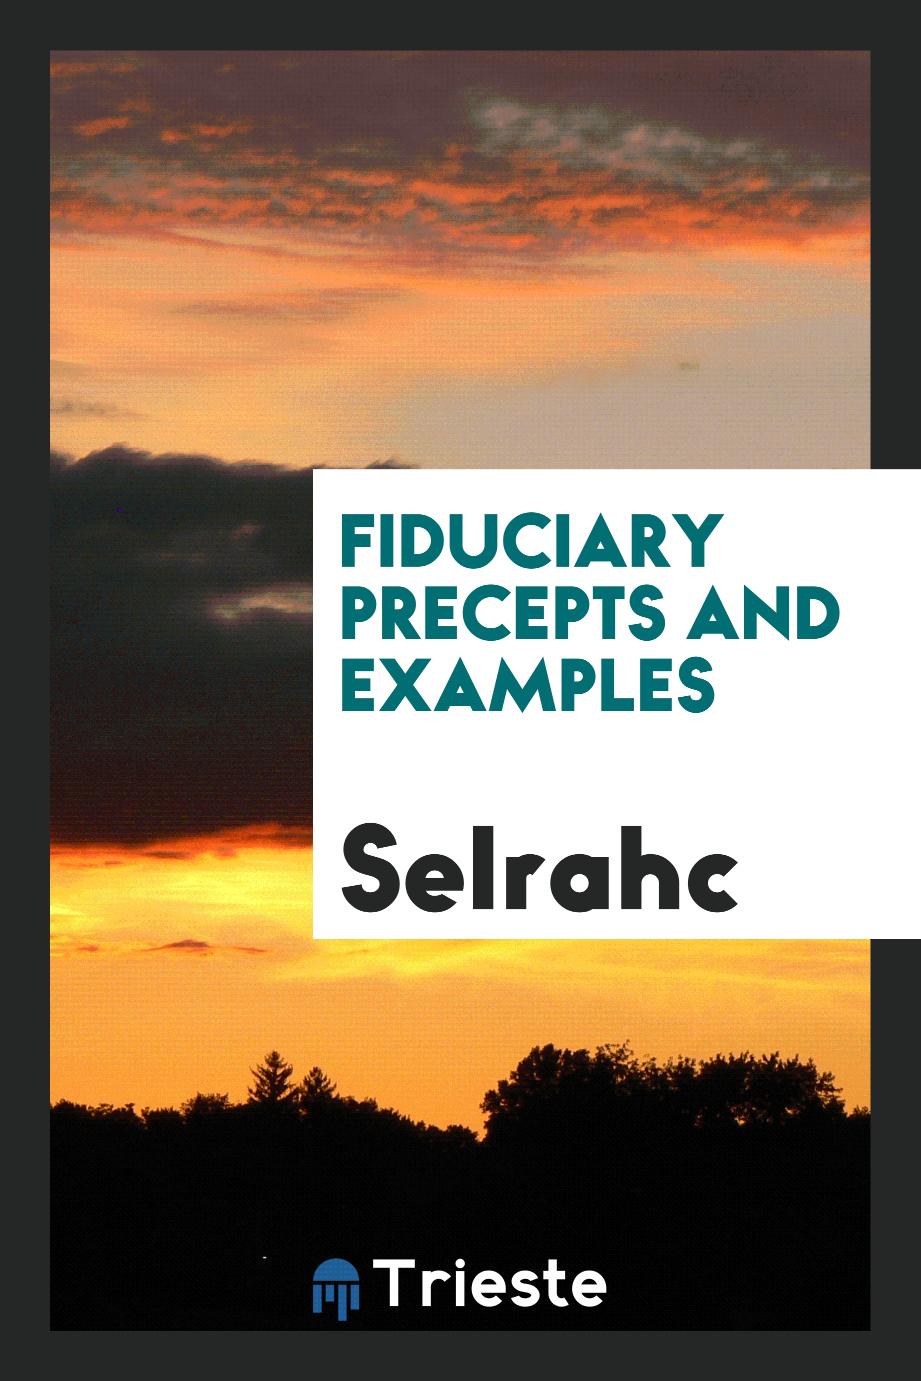 Fiduciary precepts and examples